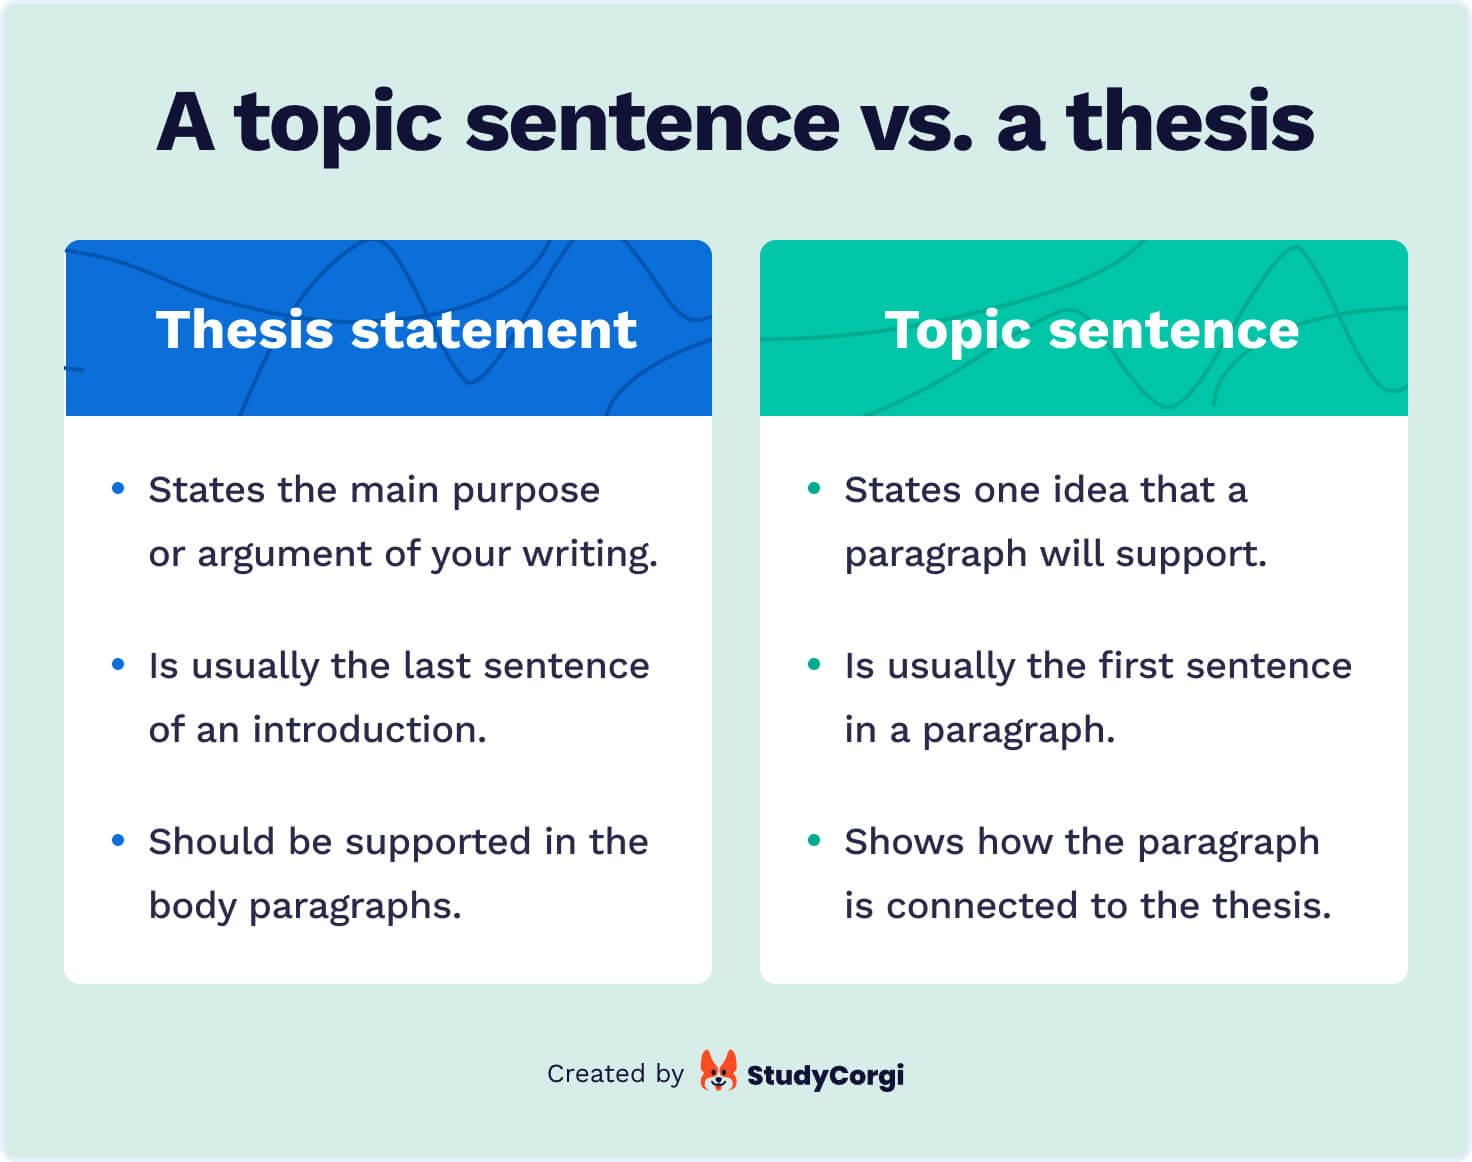 thesis statement and topic sentence venn diagram